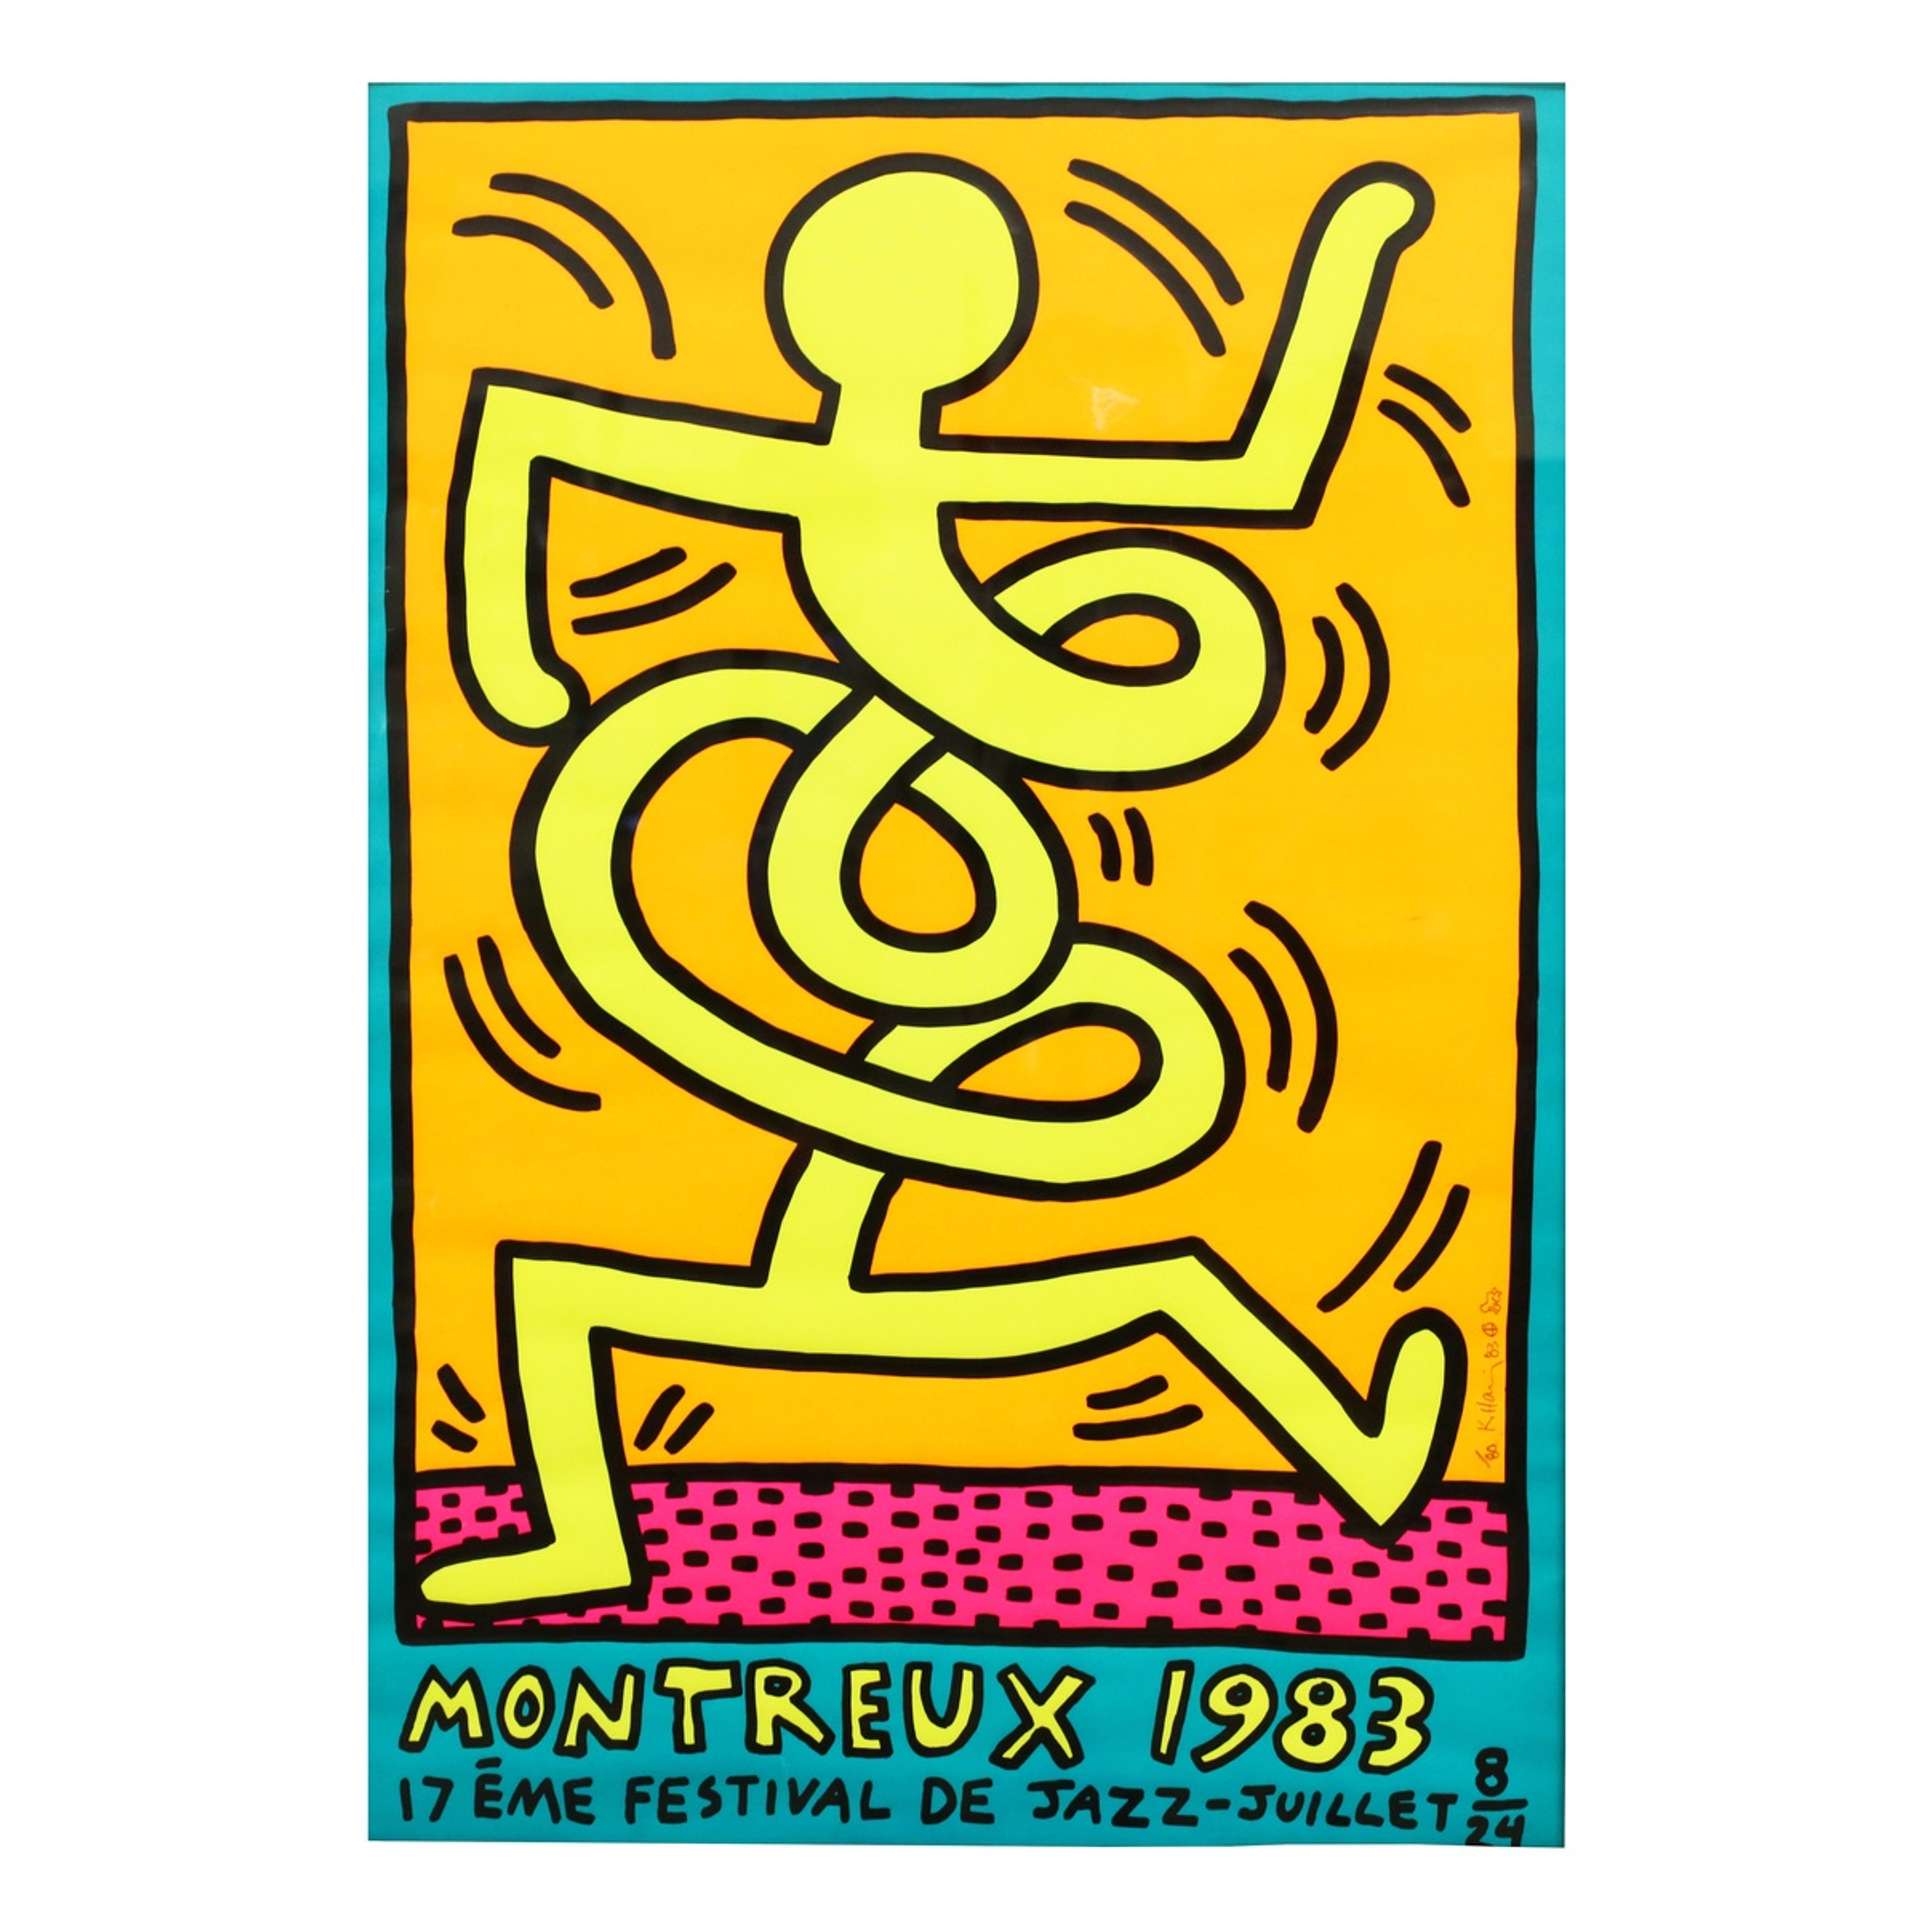 Montreux Festival De Jazz by Keith Haring